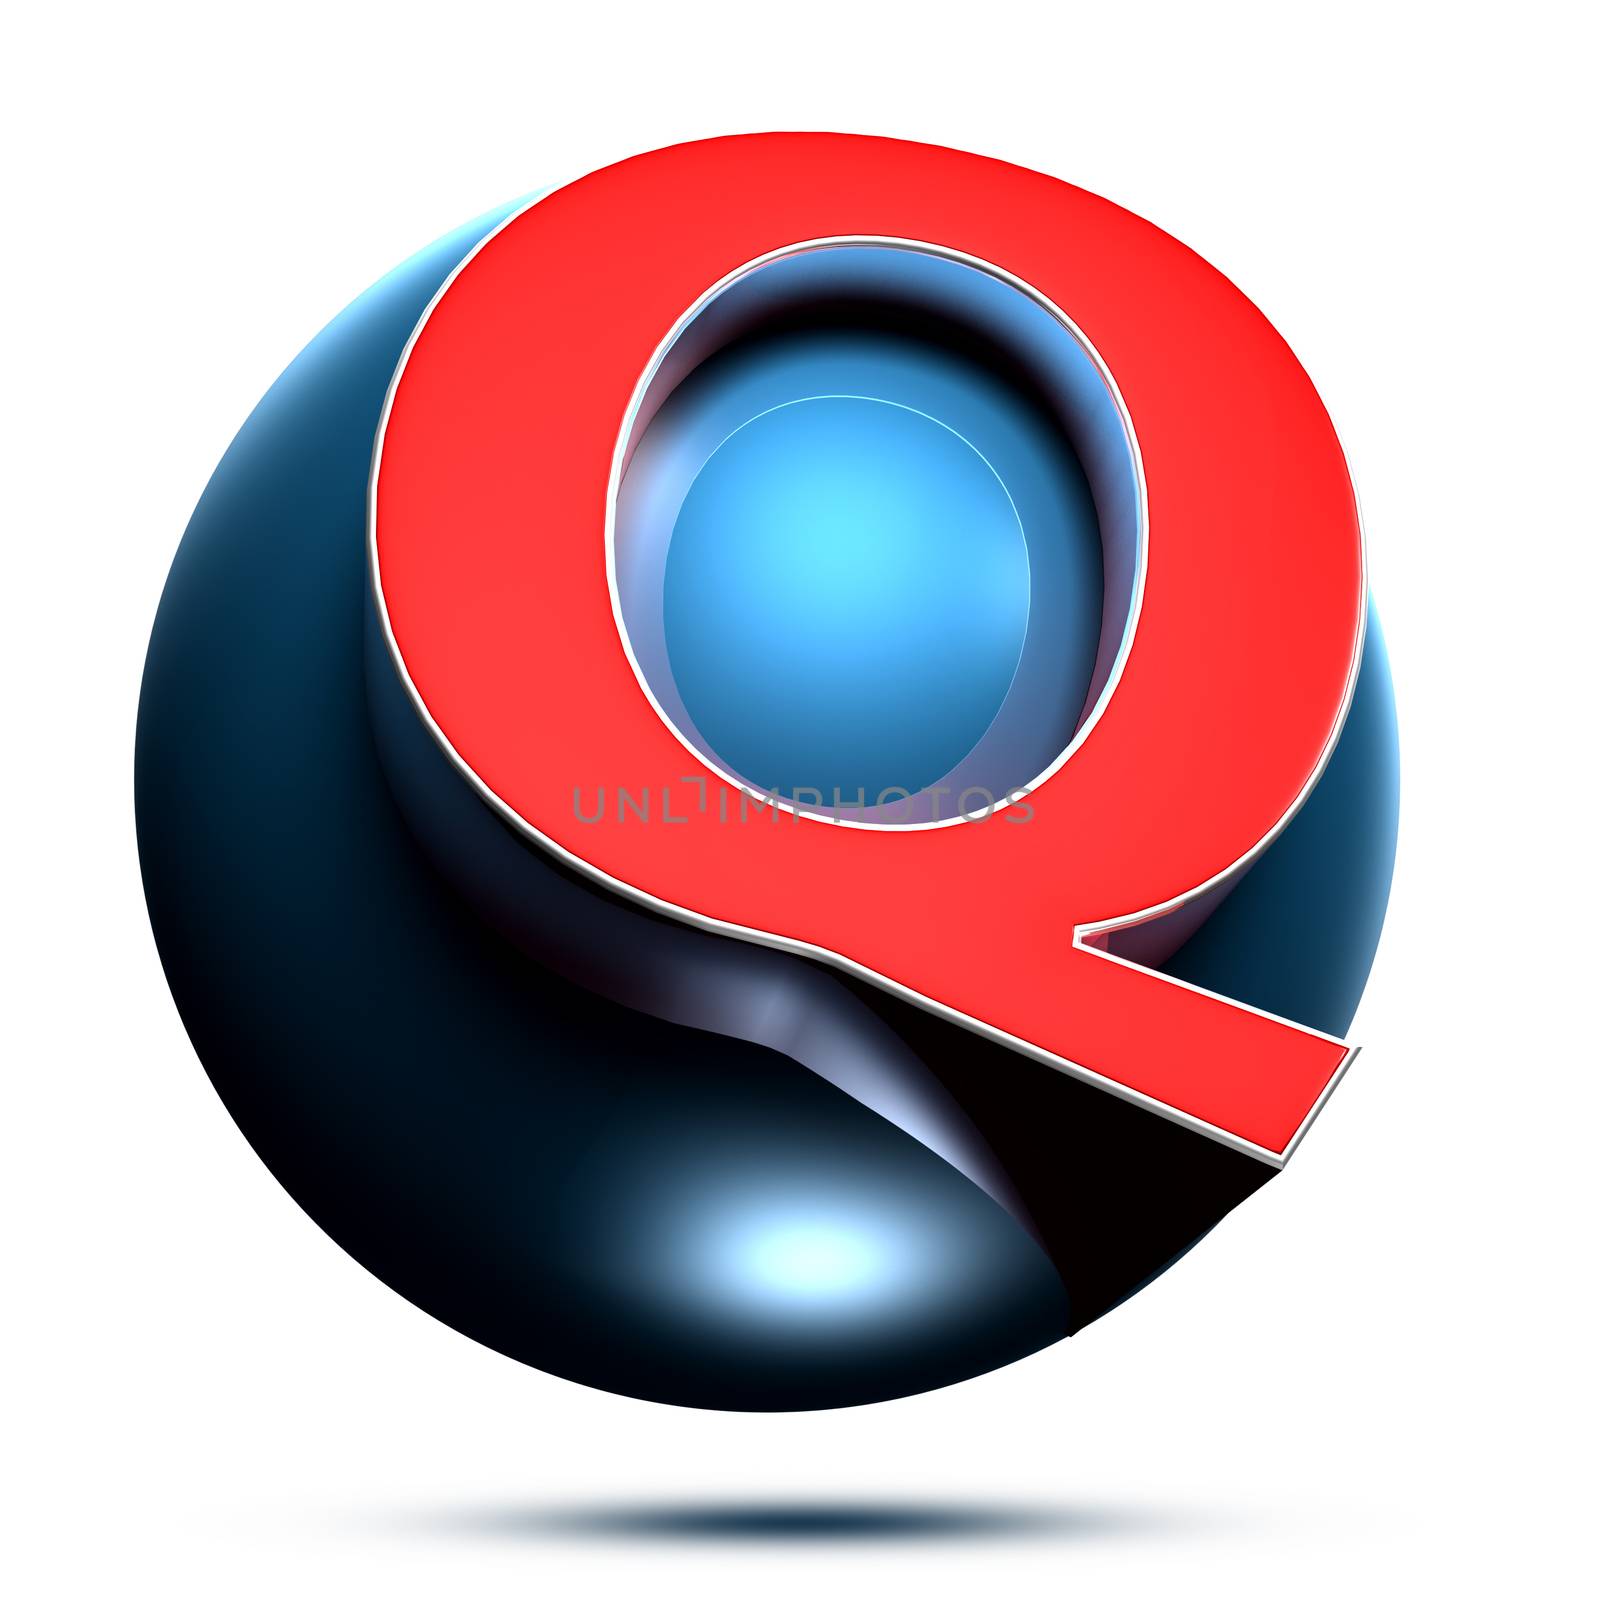 Q logo isolated on white background illustration 3D rendering with clipping path.